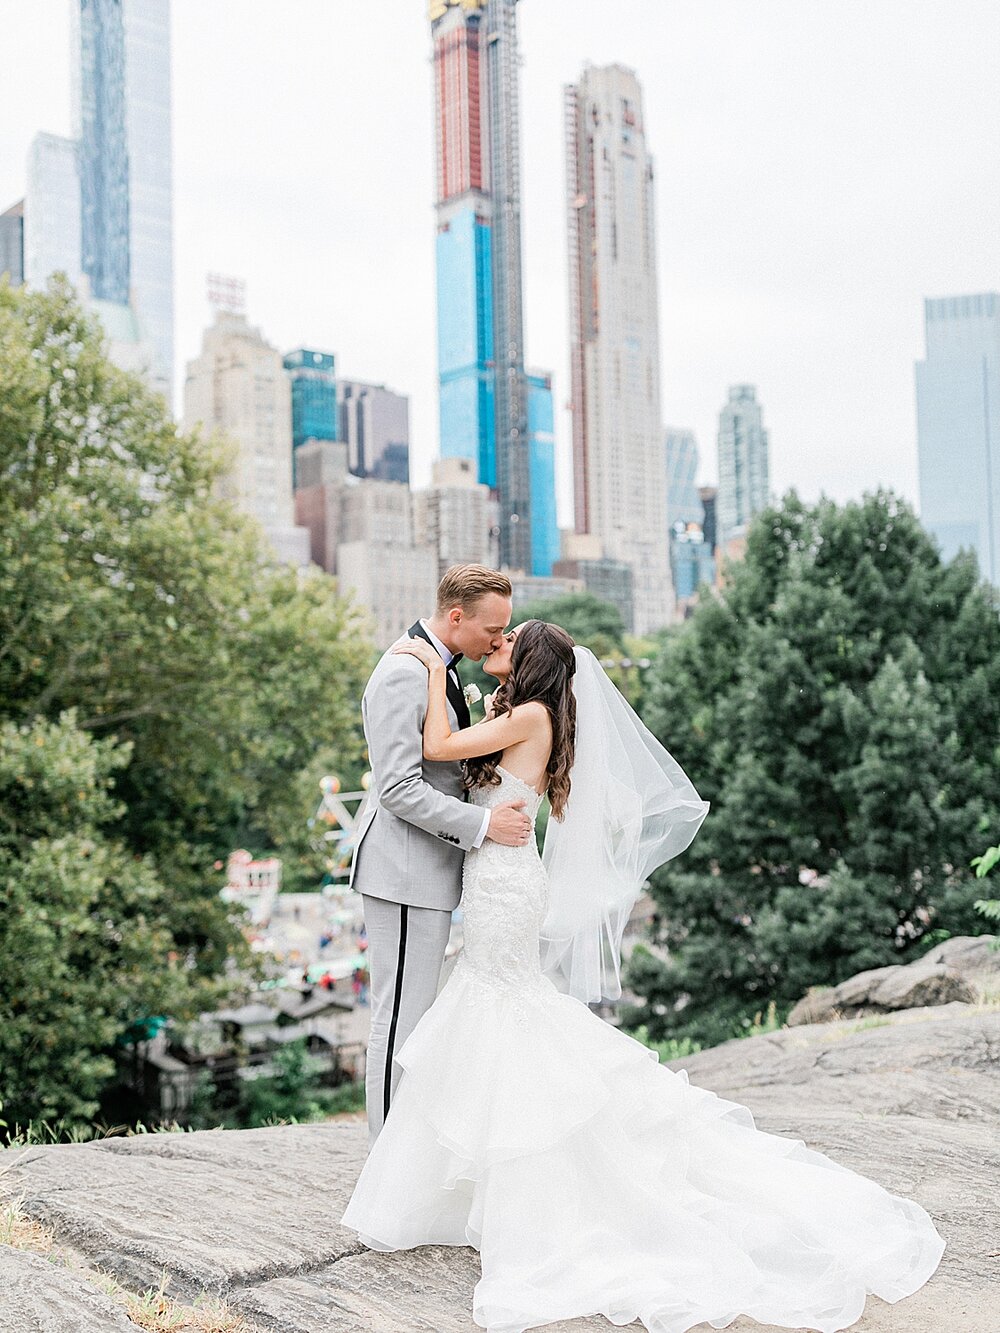 Battery Gardens wedding portraits | Tri-State area wedding venues photographed by Asher Gardner Photography